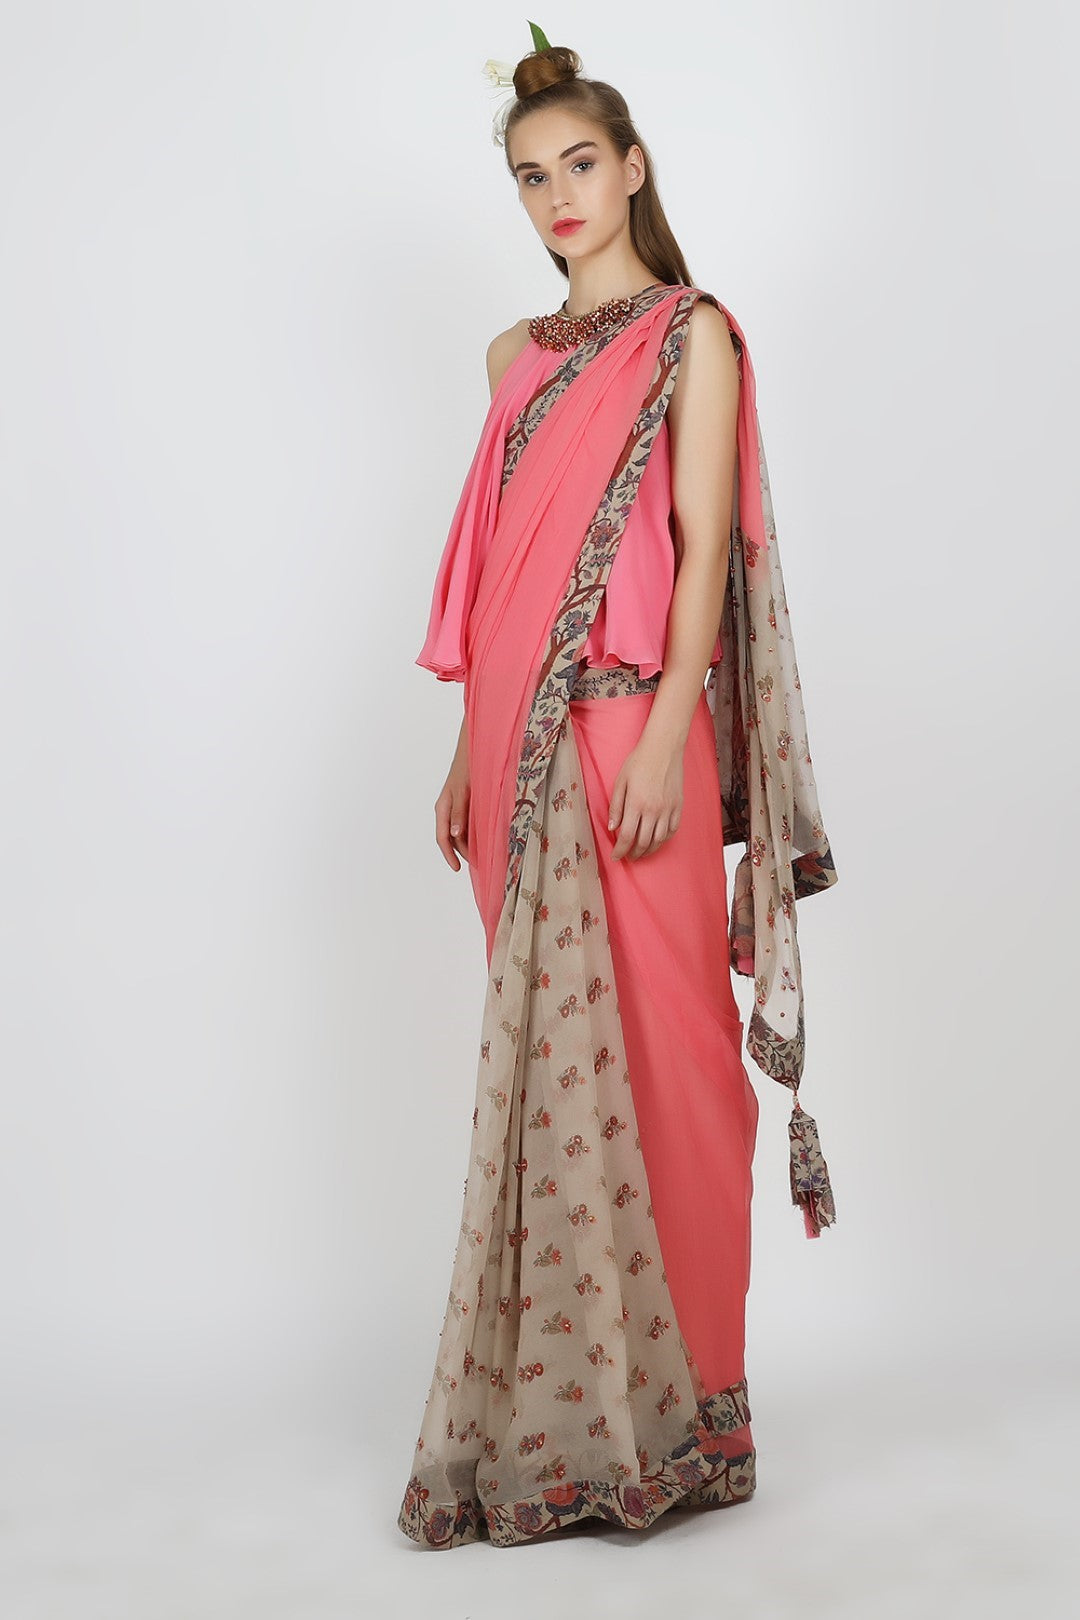 chiffon & georgette saree with crepe swing blouse